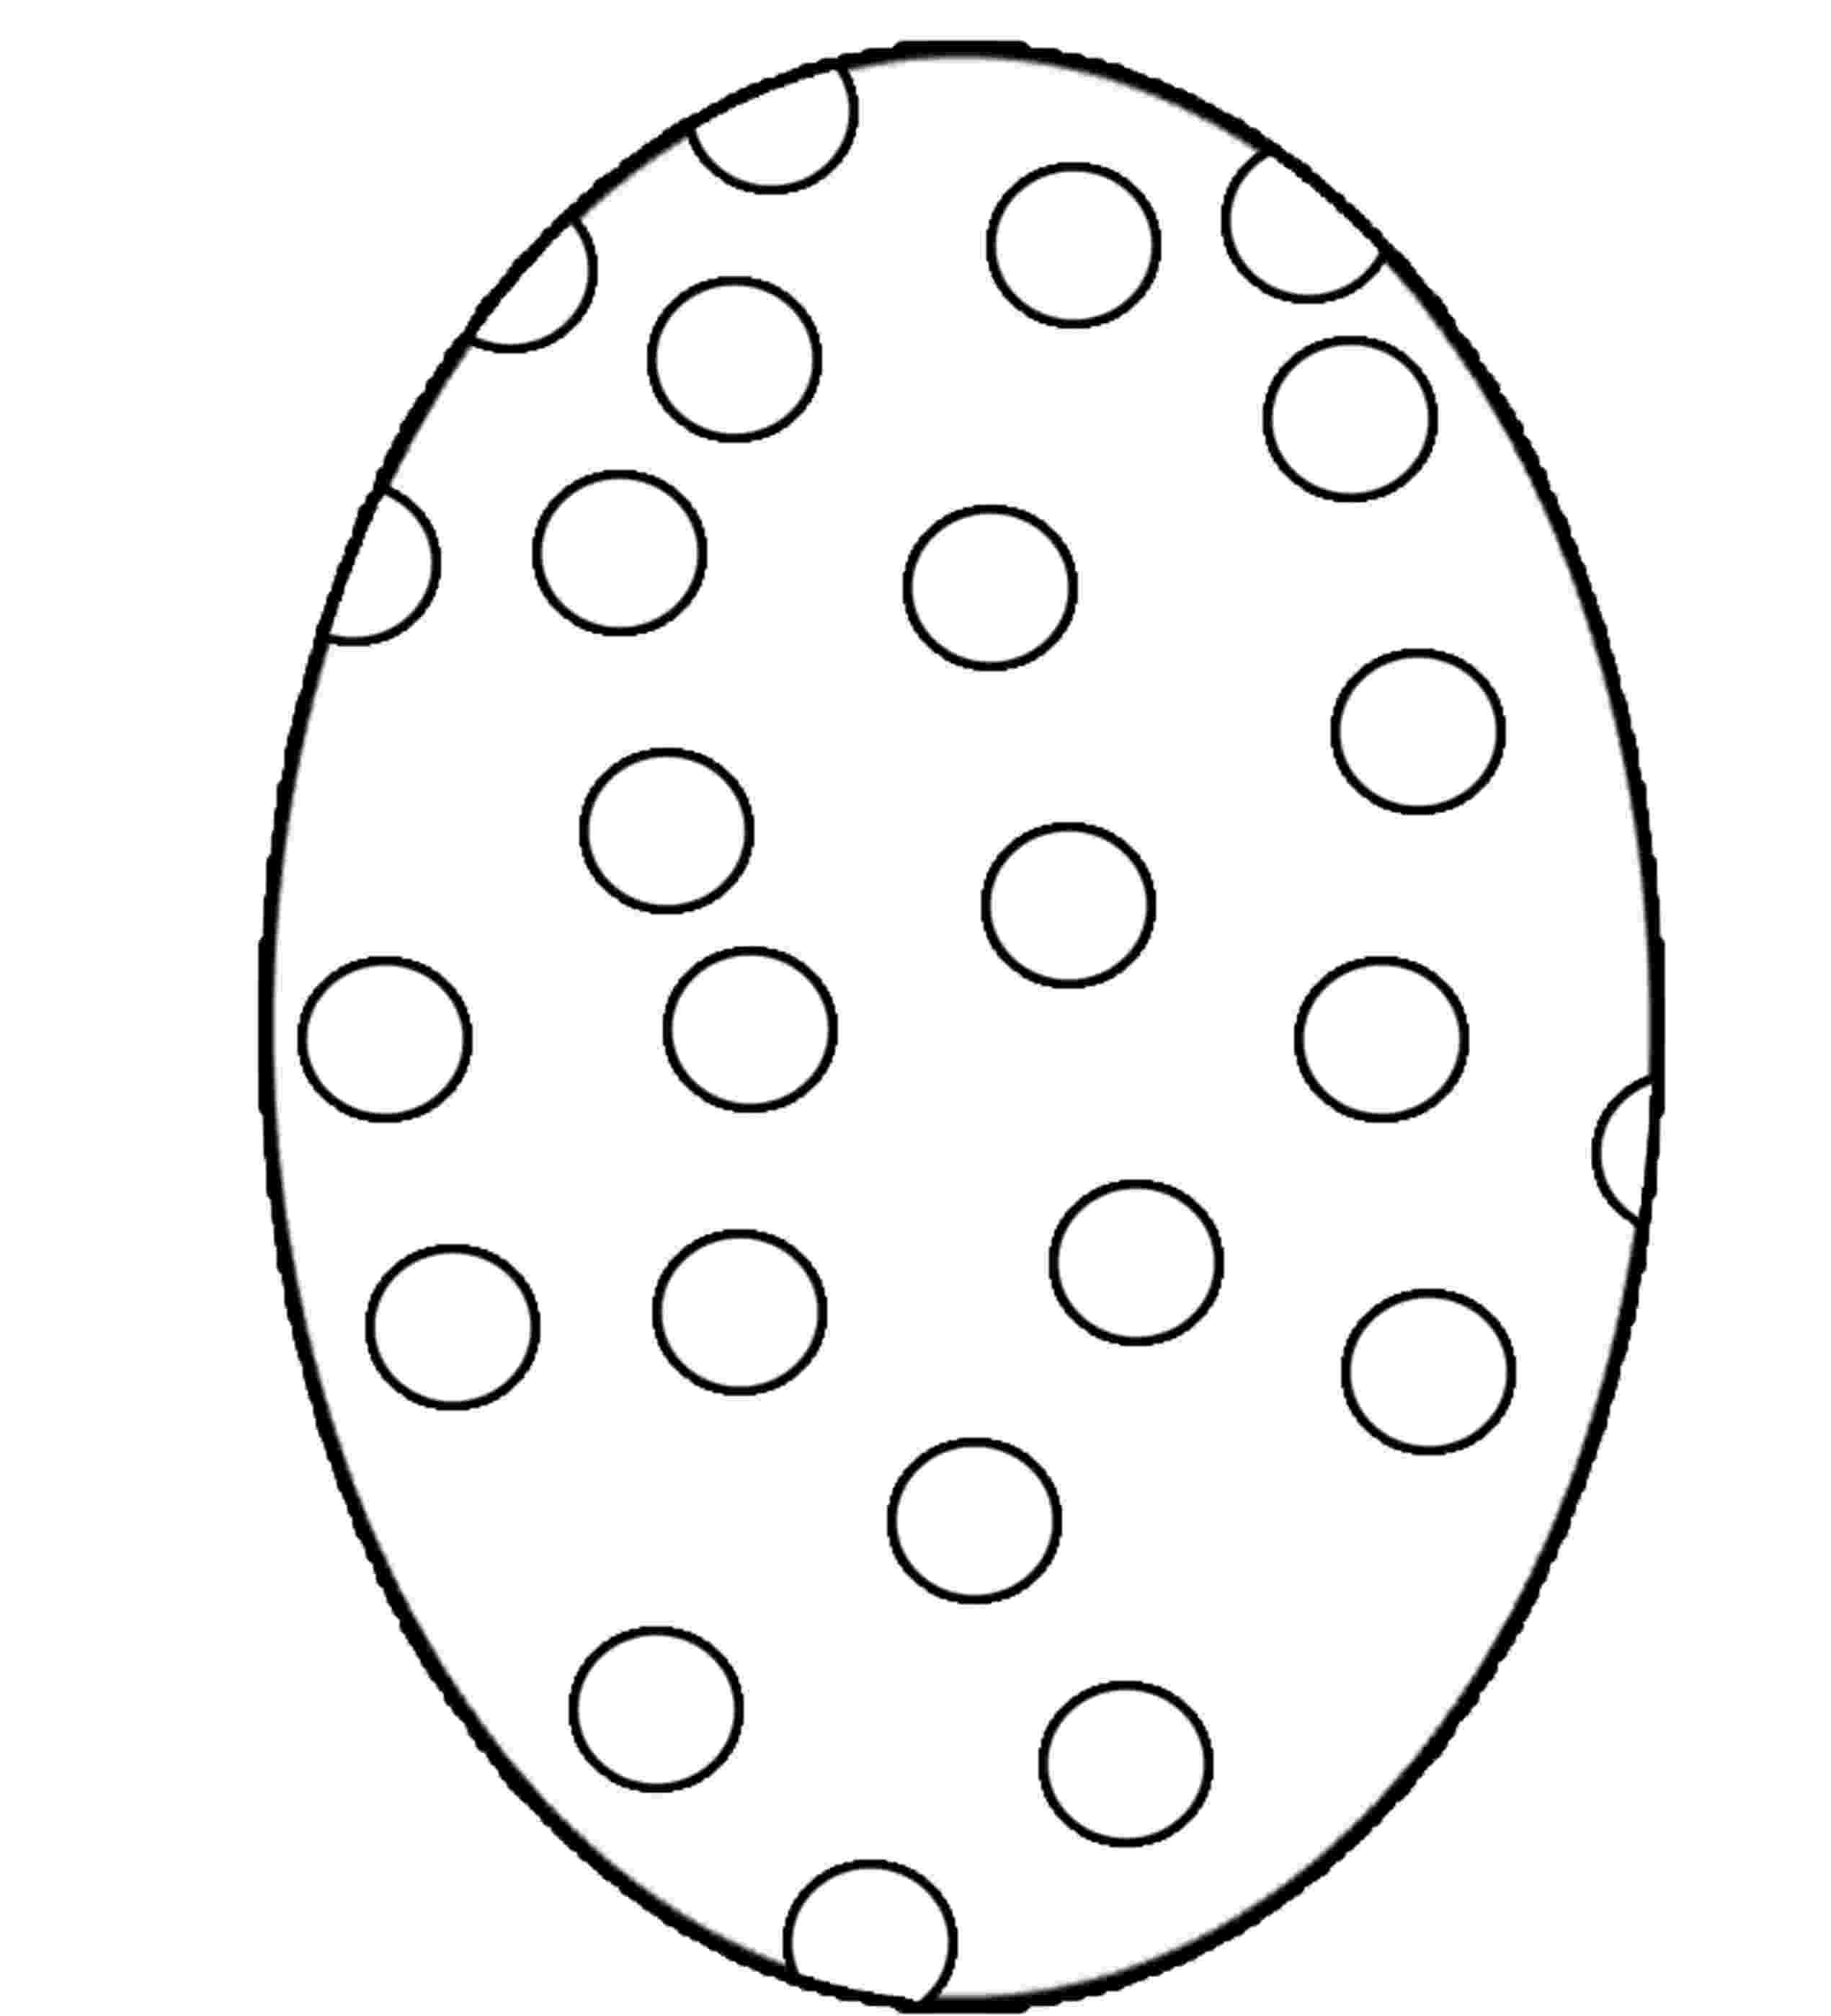 printable colouring pages of easter eggs free printable easter egg coloring pages for kids pages easter eggs of colouring printable 